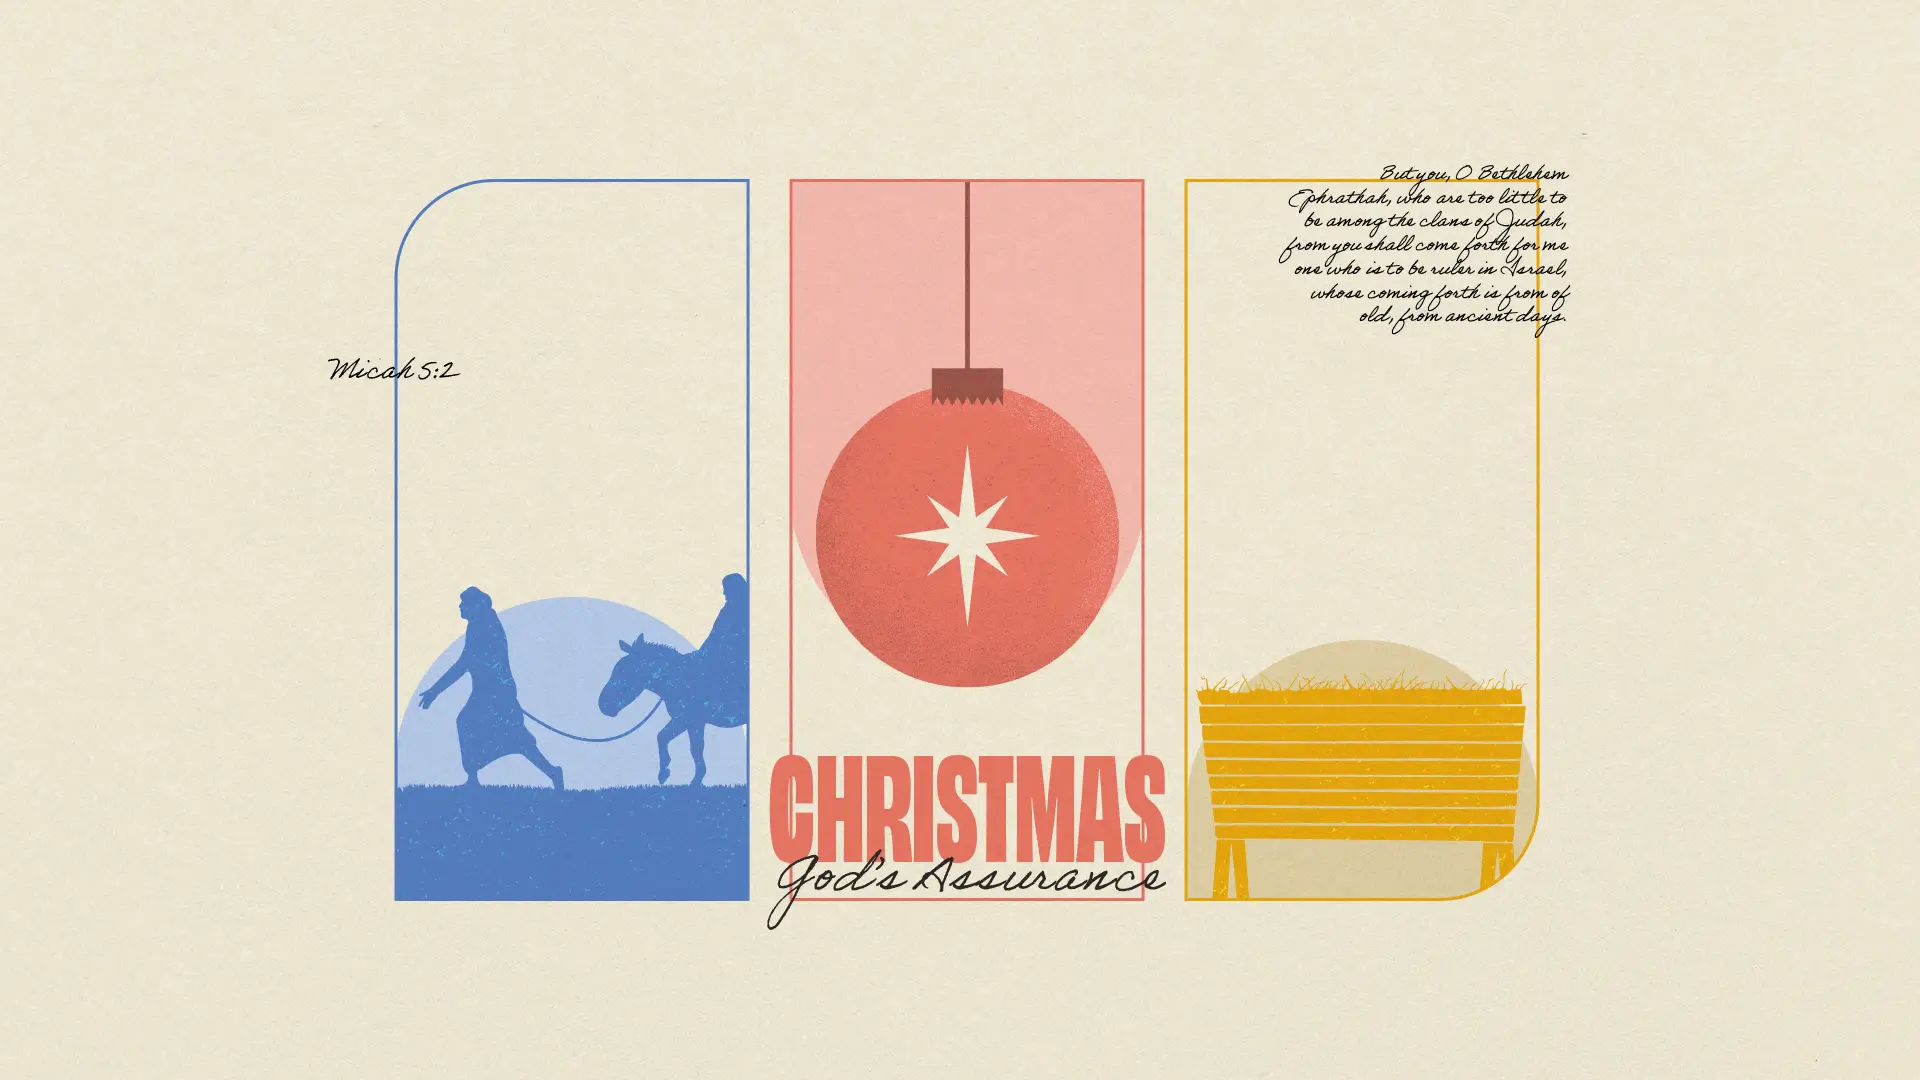 Christmas Gods Assurance Slide | Remix Church Media | Editable Design Templates And Resources Made For The Church.